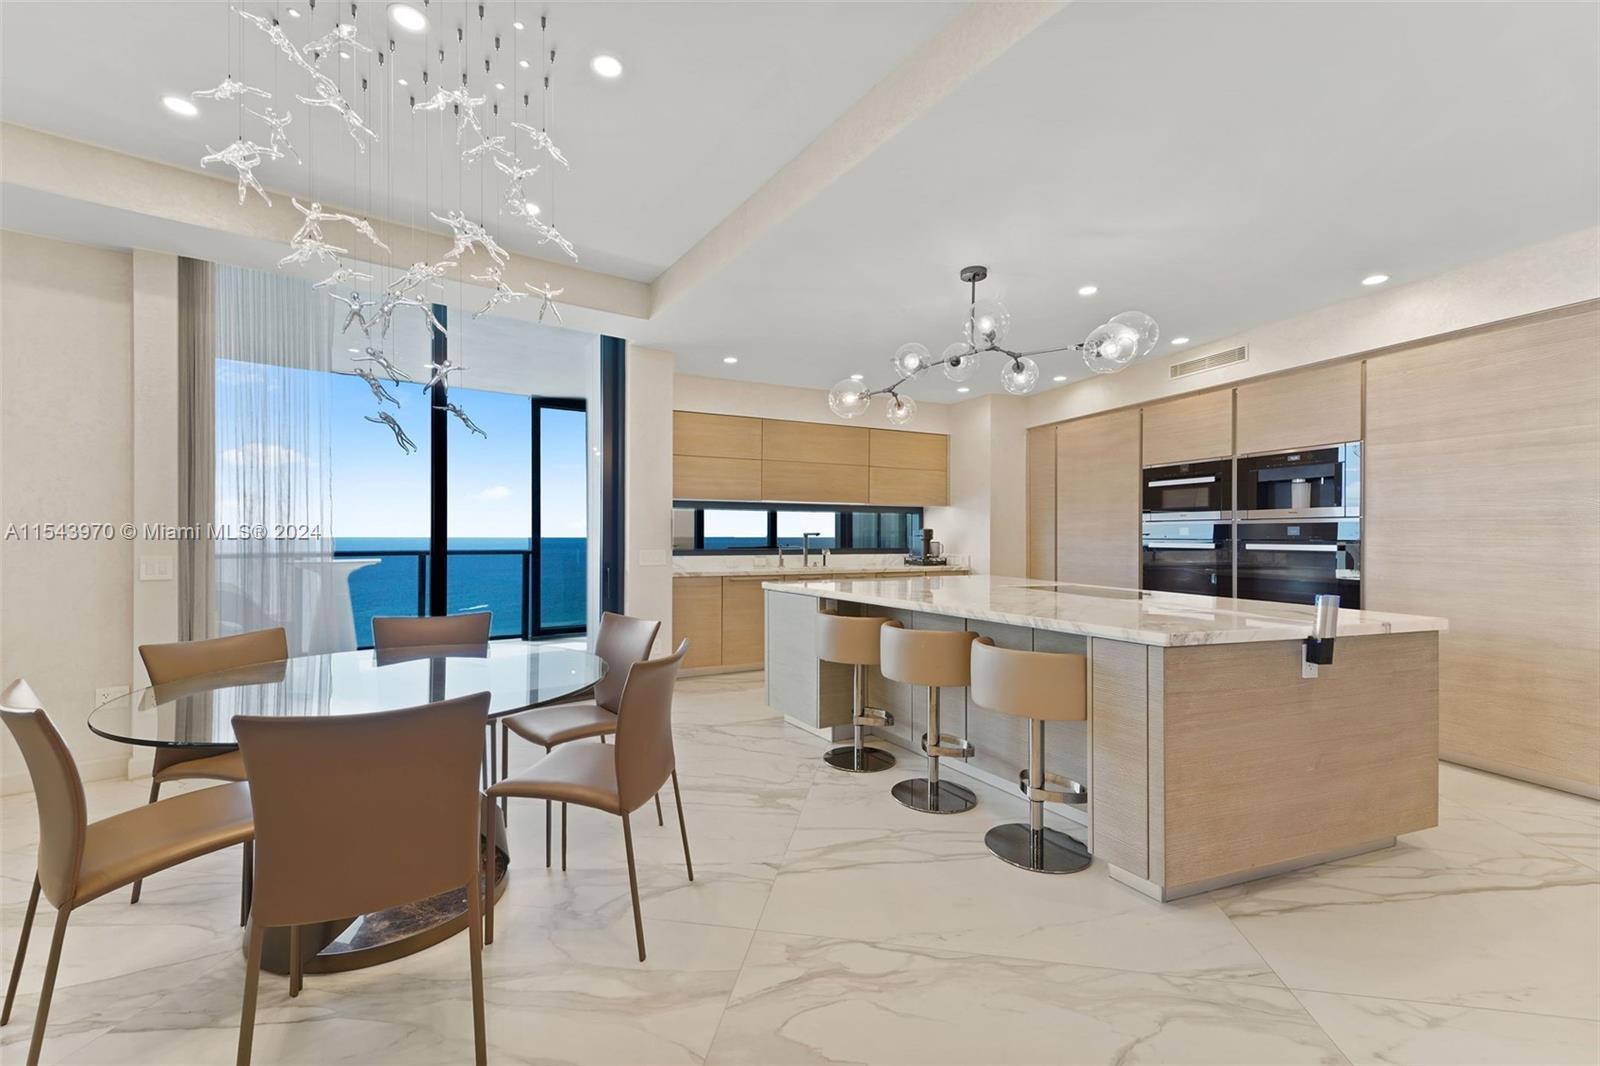 Photo of 18555 Collins Ave #2201 in Sunny Isles Beach, FL